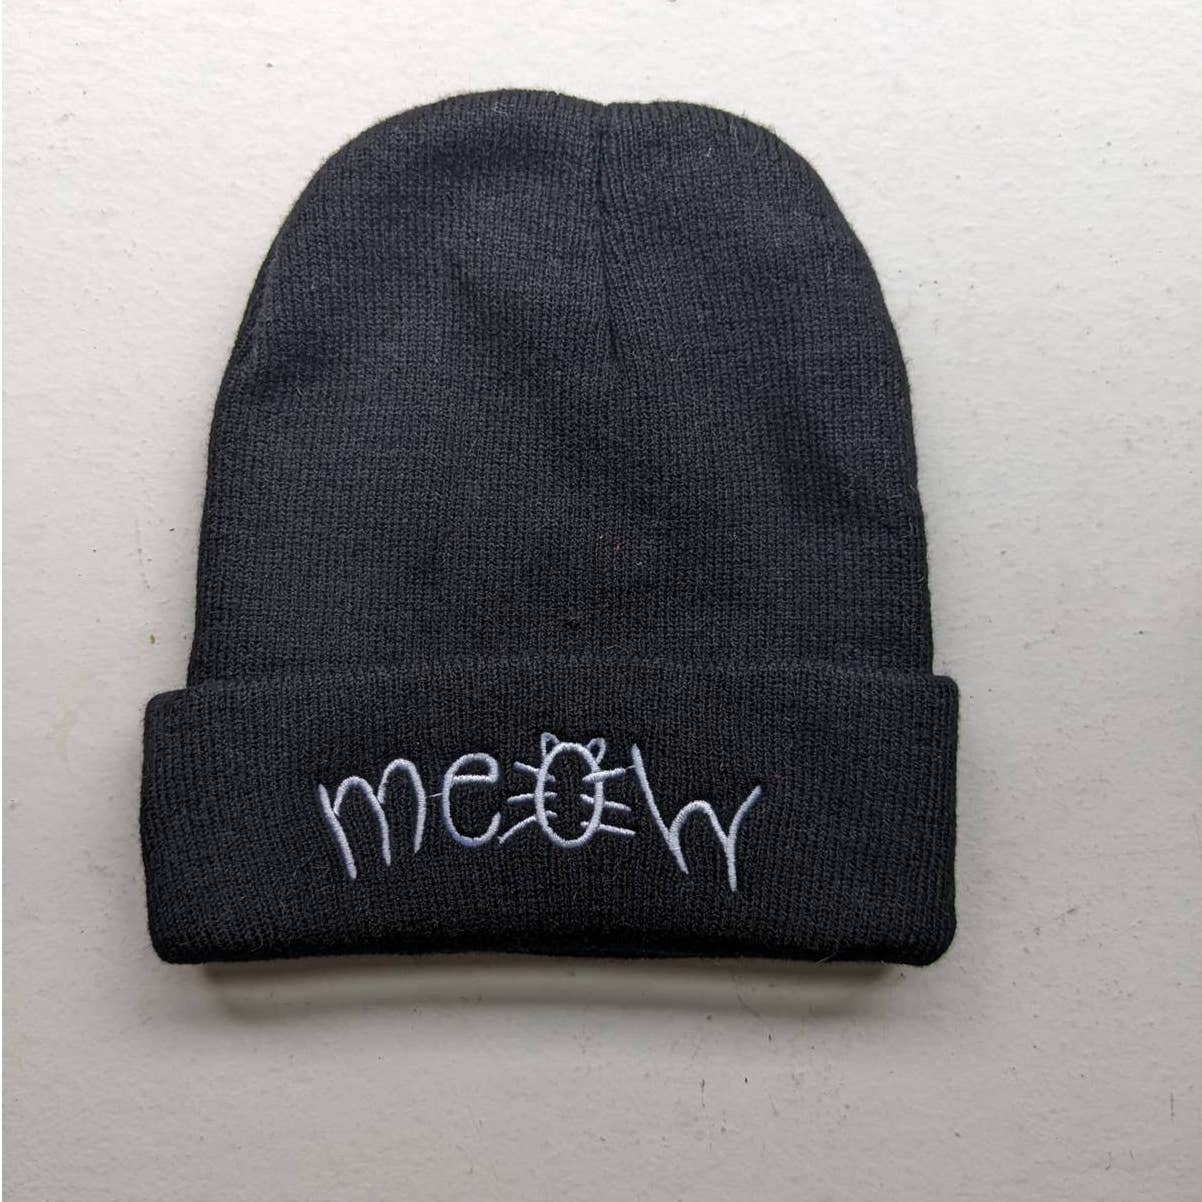 Y2K Kawaii Black Cat Meow Embroidered Beanie Ribbed Kitty Minimalist Grunge Hat